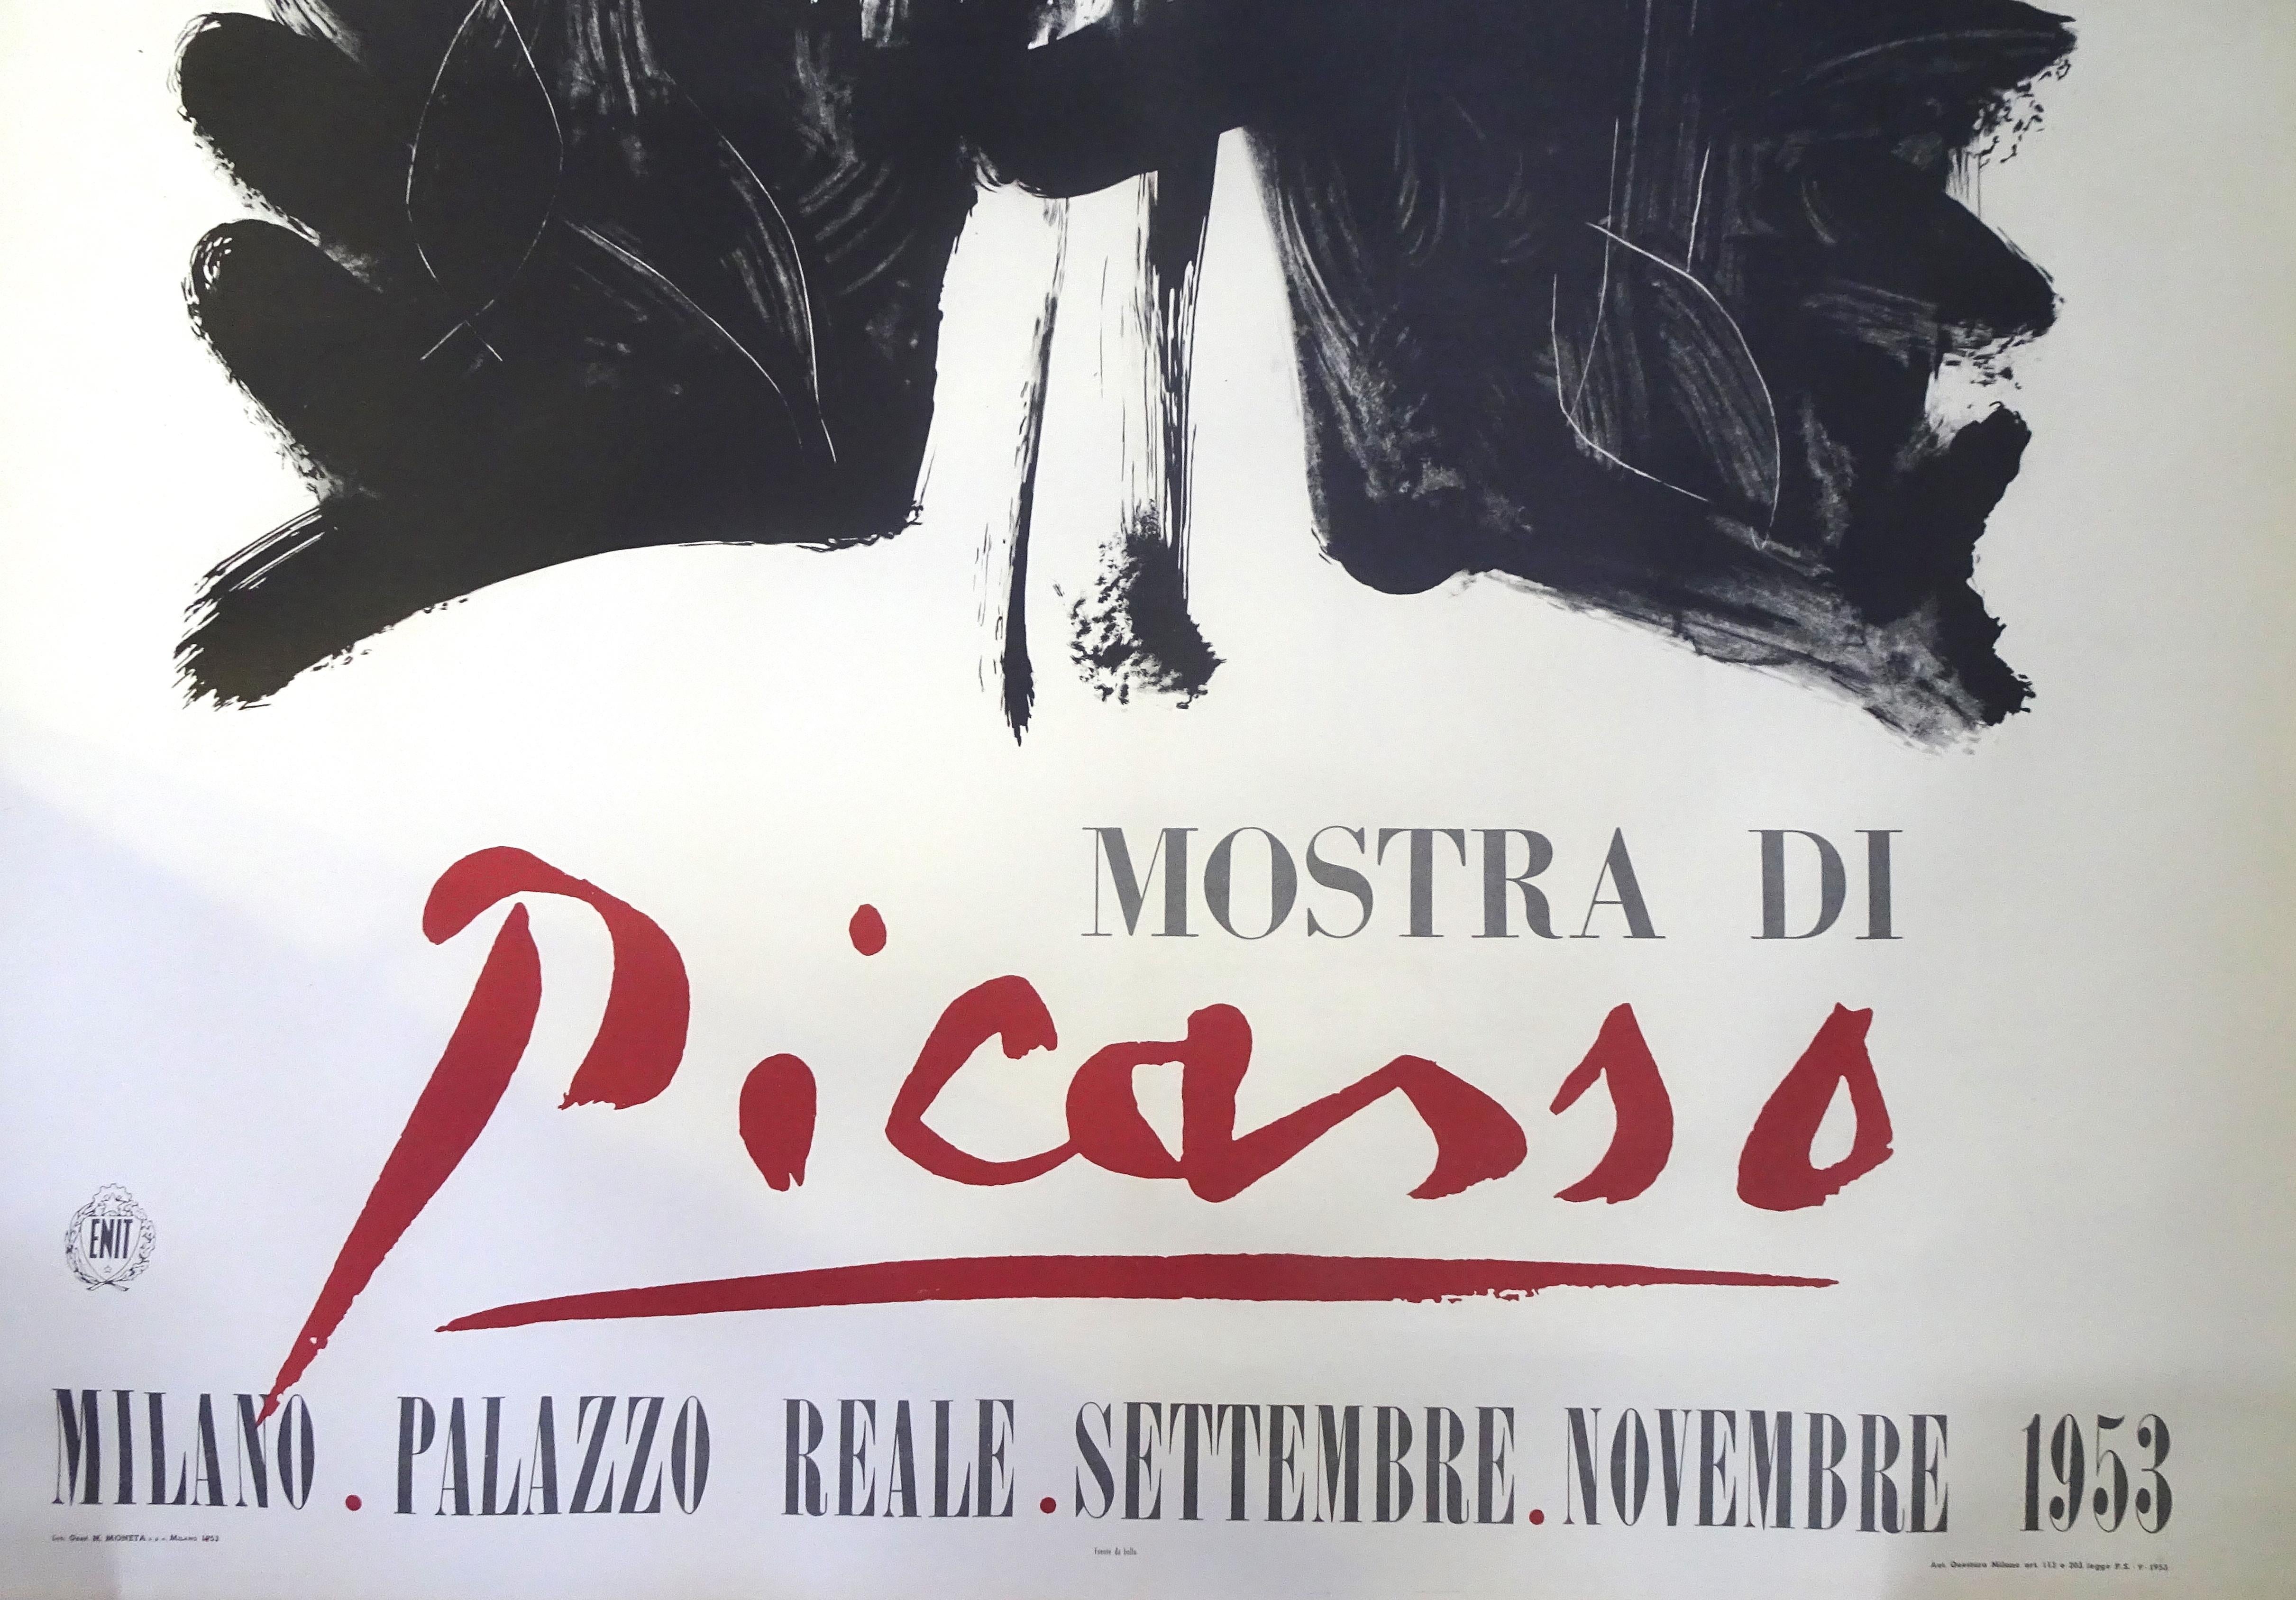 Faun - Vintage Poster - Picasso Exhibition in Milan 1953 - Print by (after) Pablo Picasso